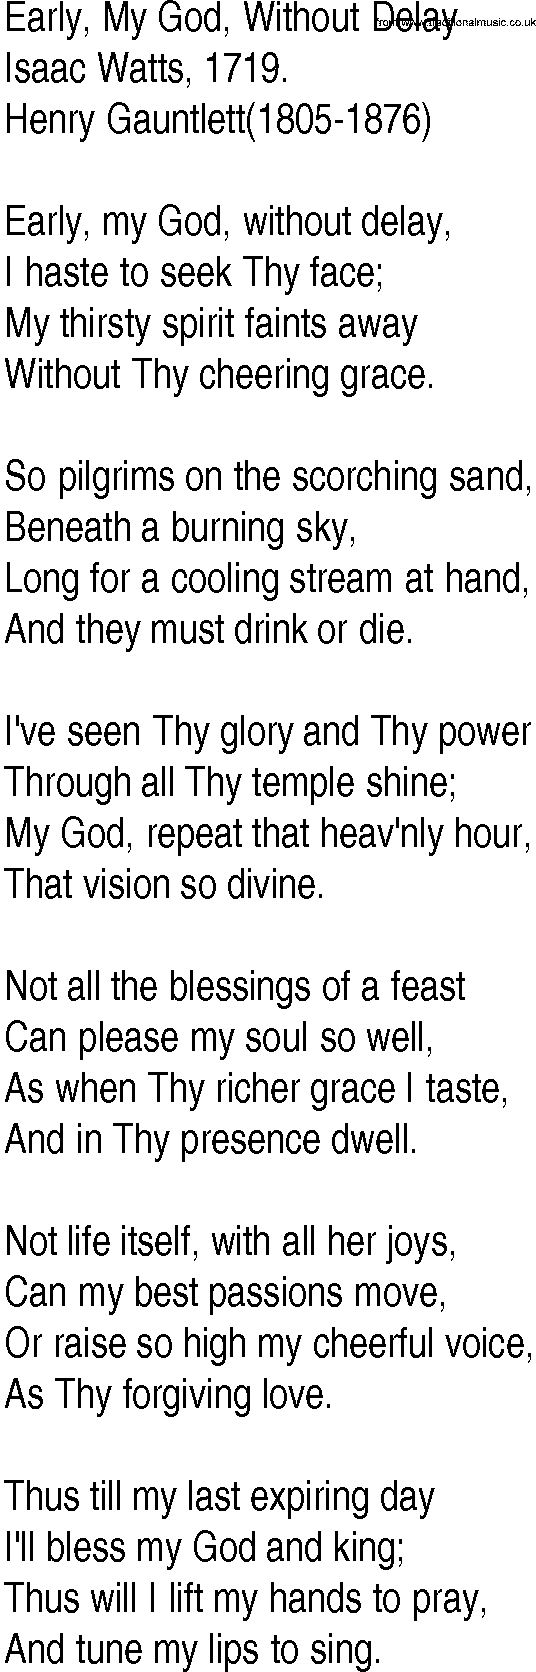 Hymn and Gospel Song: Early, My God, Without Delay by Isaac Watts lyrics